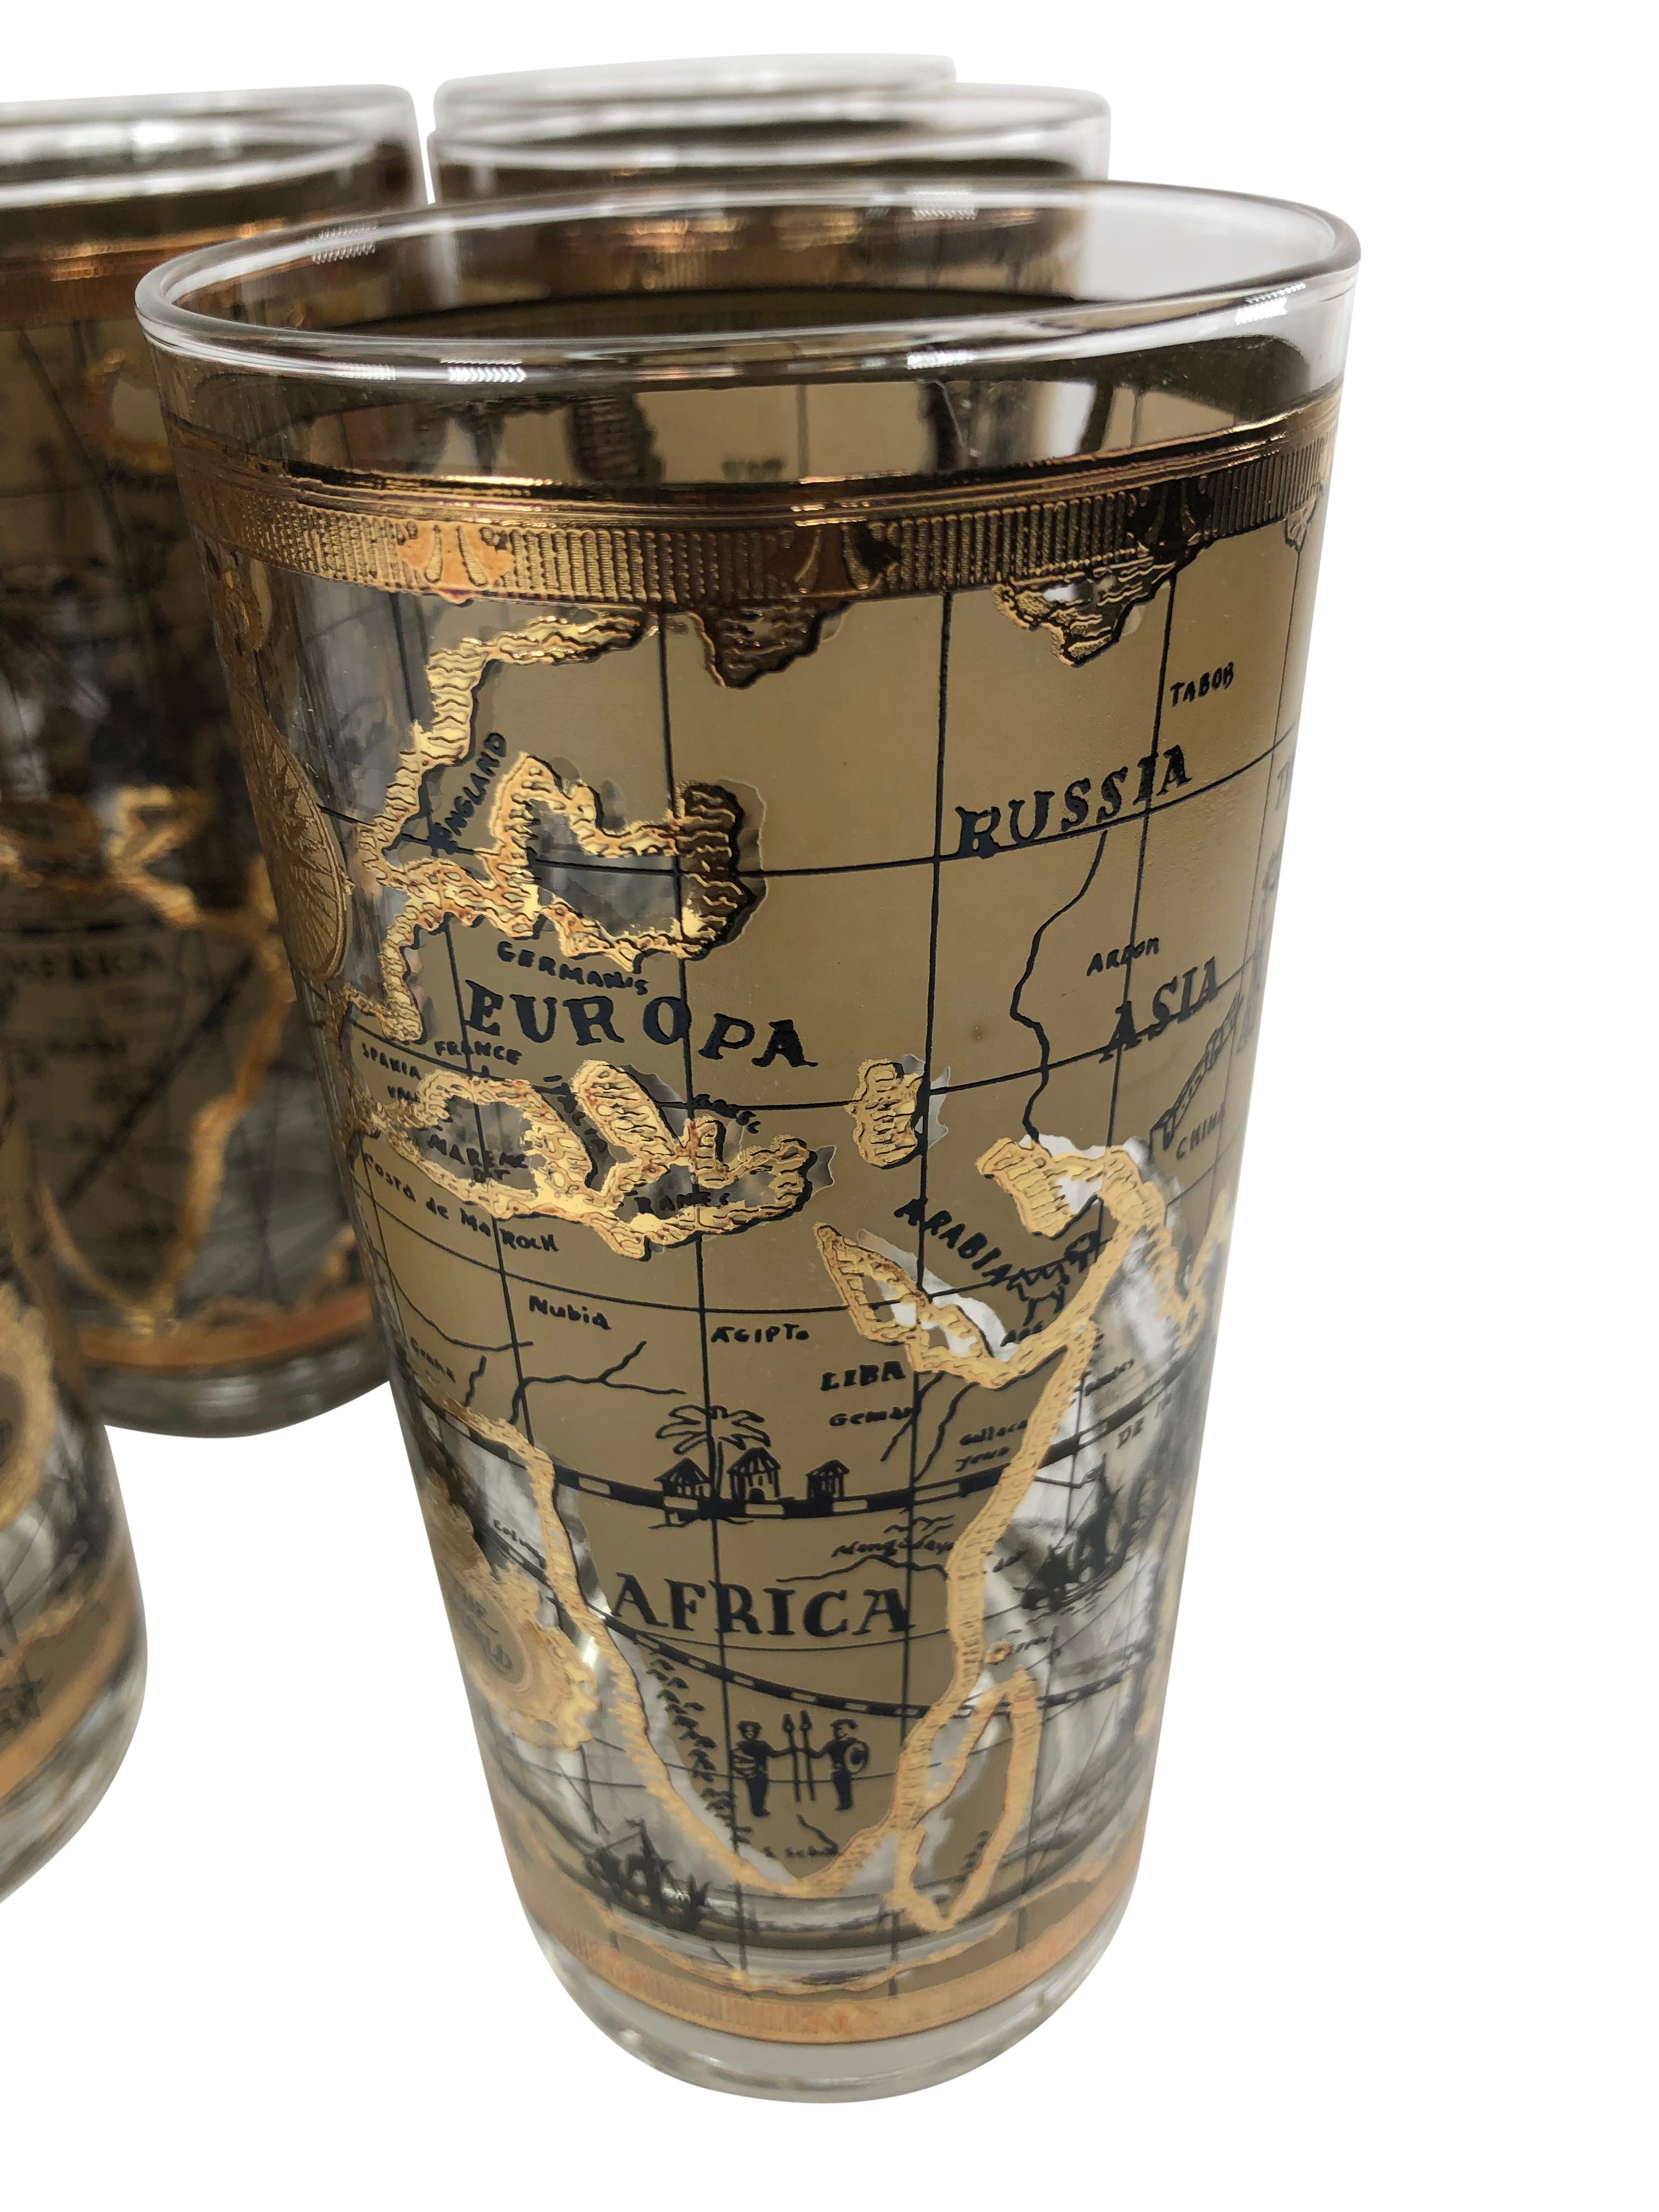 Vintage Cera Glass Highball Glasses With Old World Maps - Set of 8 For Sale 1